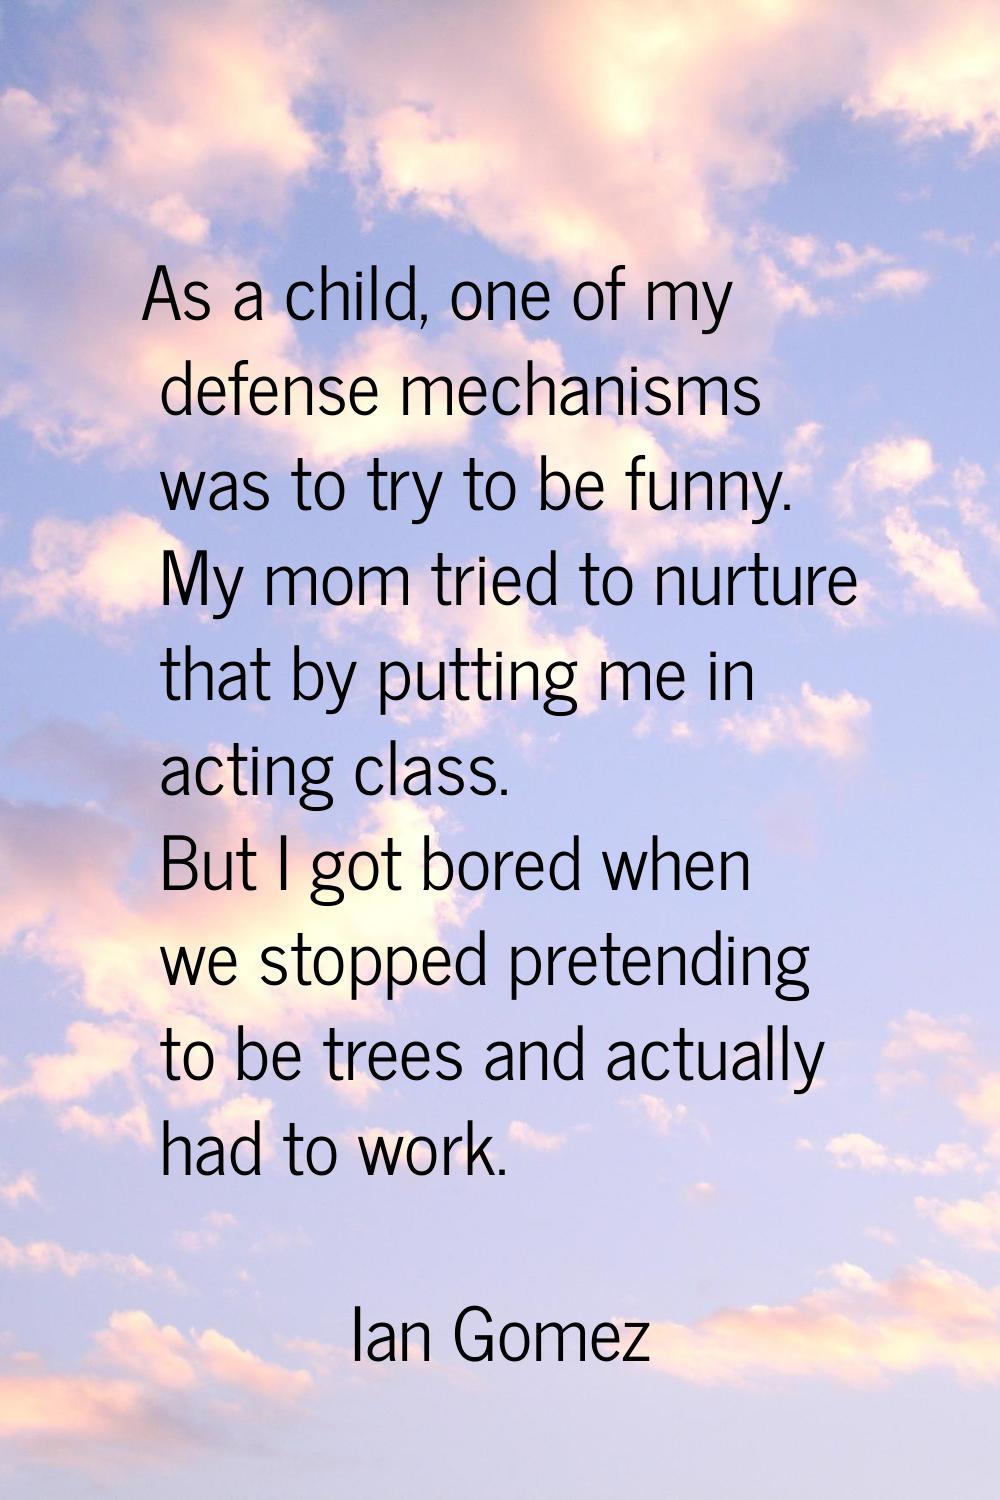 As a child, one of my defense mechanisms was to try to be funny. My mom tried to nurture that by pu